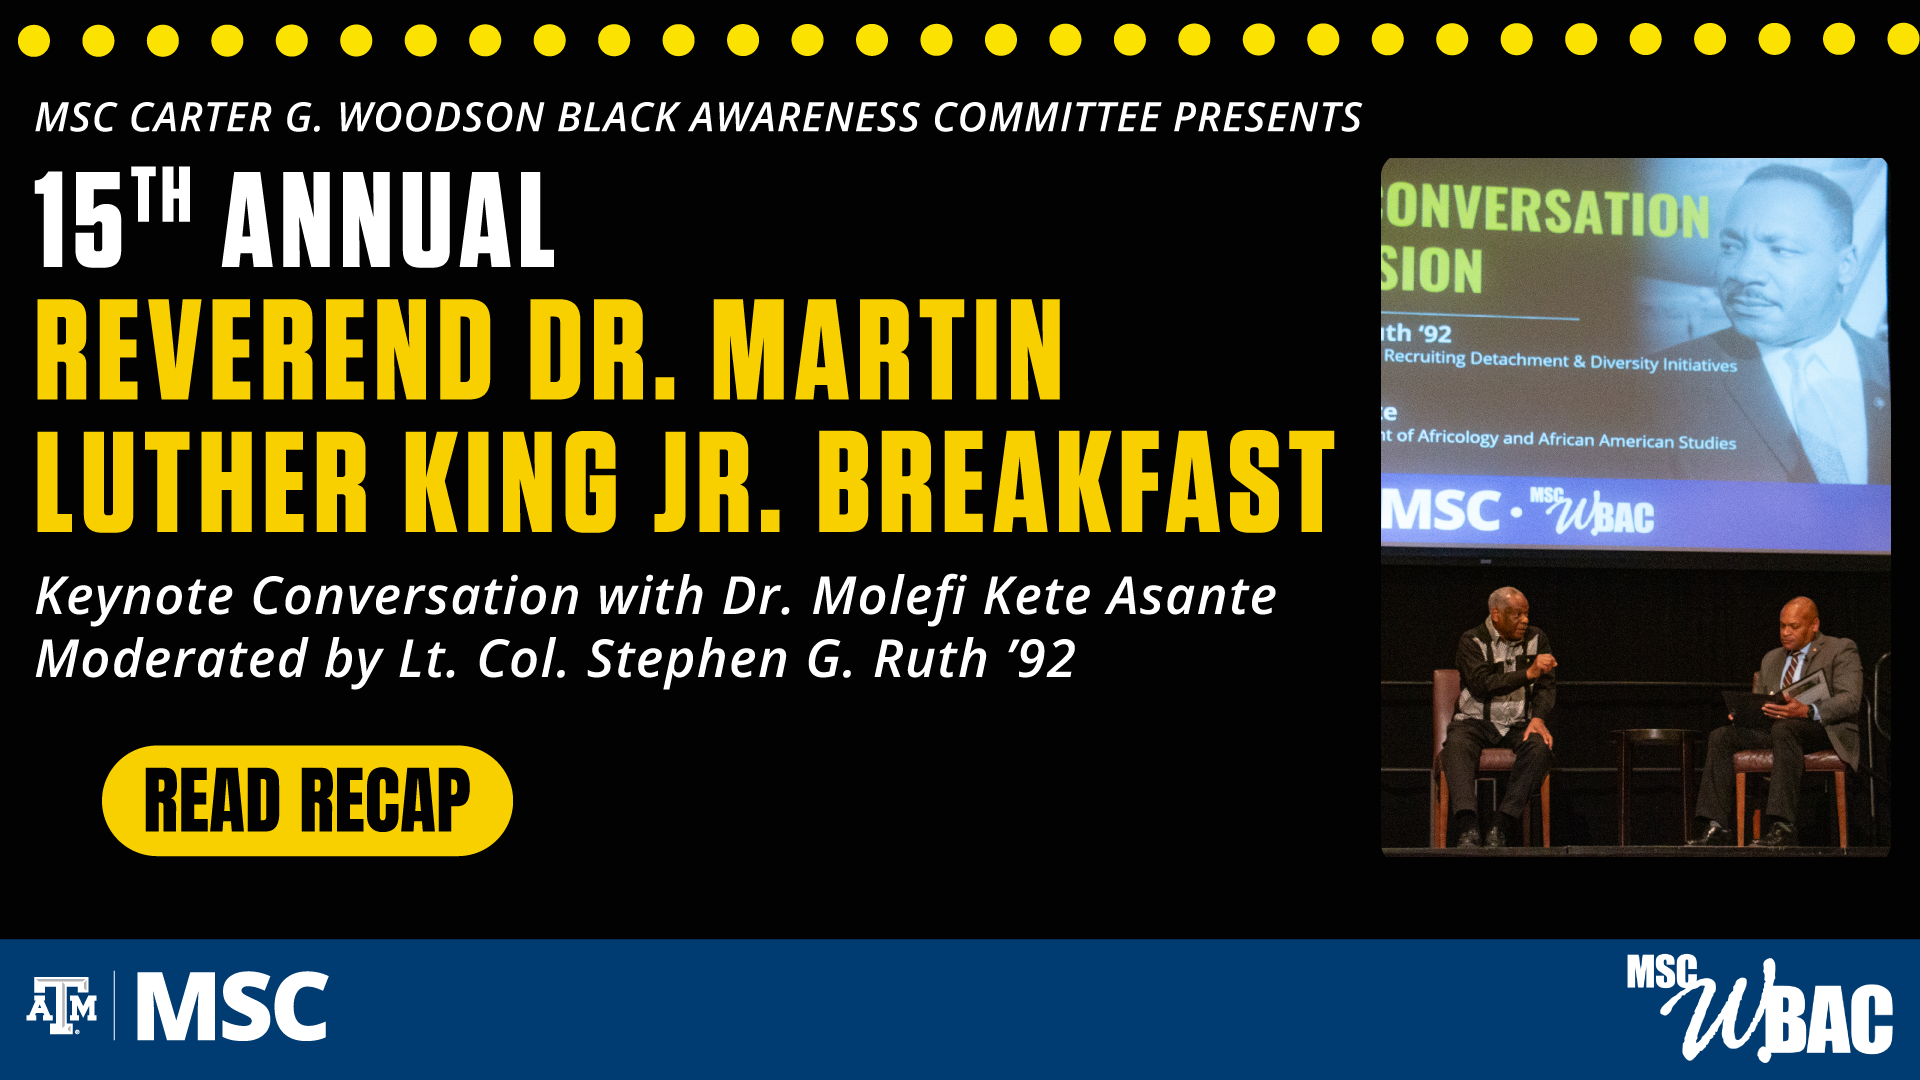 MSC Carter G. Woodson Black Awareness Committee Presents: 15th Annual Reverend Dr. Martin Luther King Jr. Breakfast. Keynote Conversation with Dr. Molefi Kete Asante, Moderated by Lt. Col. Stephen G. Ruth '92. Read Recap